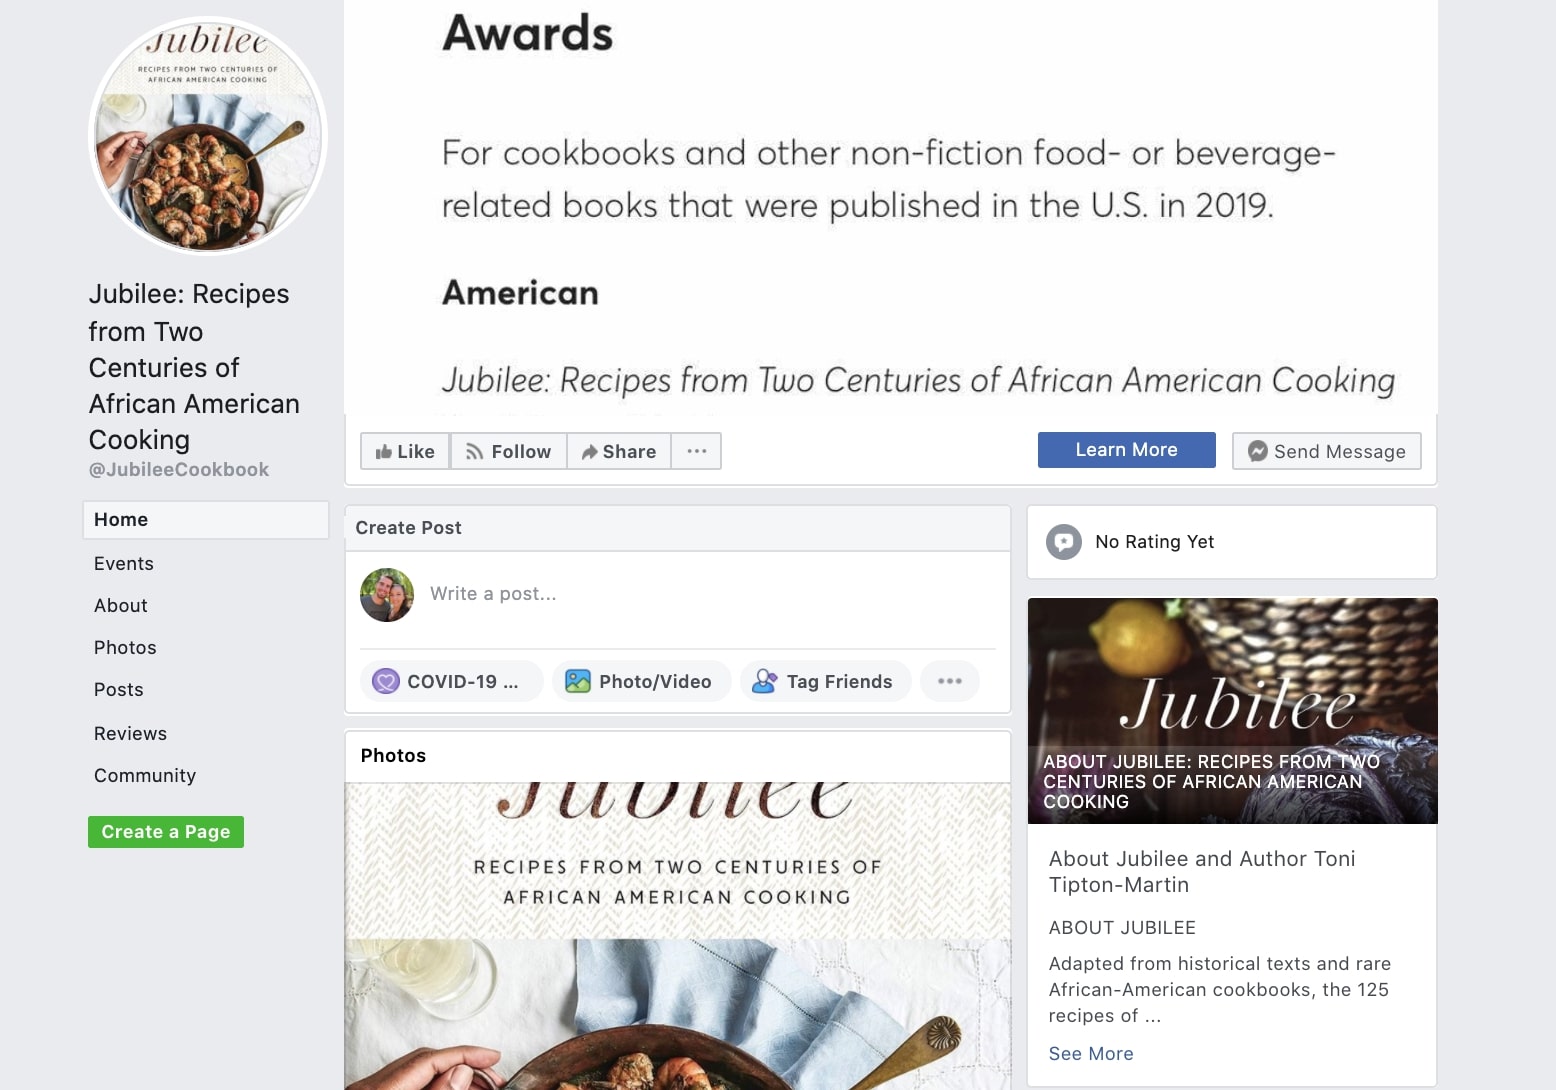 Screenshot of the Facebook page for "Jubilee Recipes From Two Centuries of African American Cooking" cookbook.